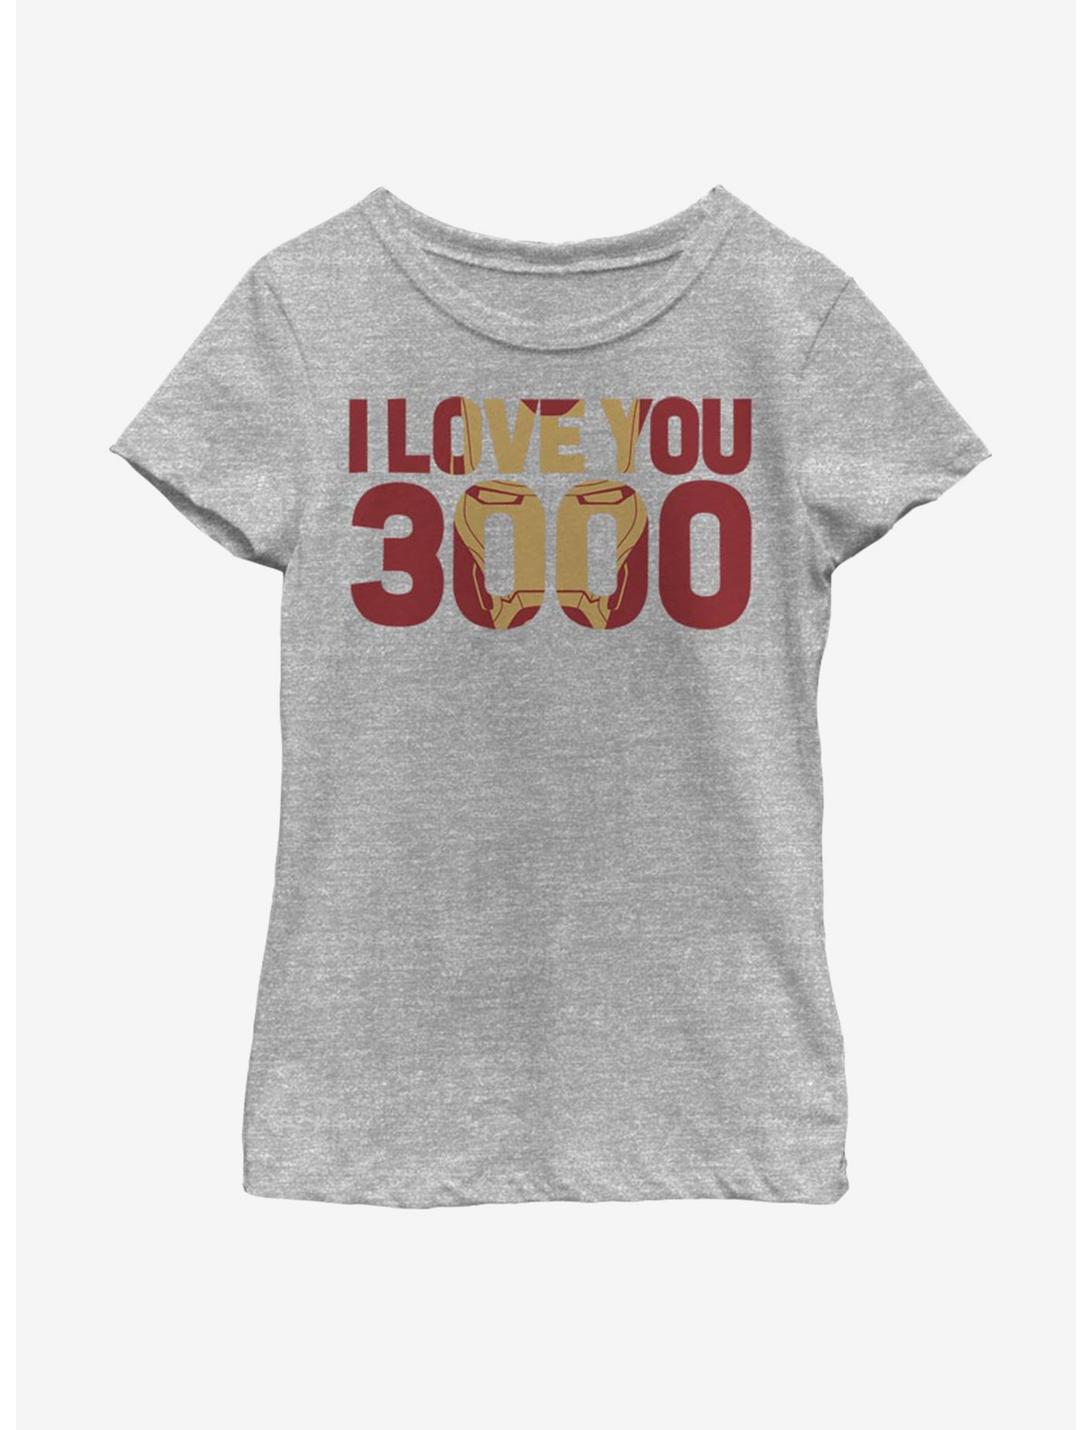 Marvel Iron Man Love You 3000 Youth Girls T-Shirt, ATH HTR, hi-res